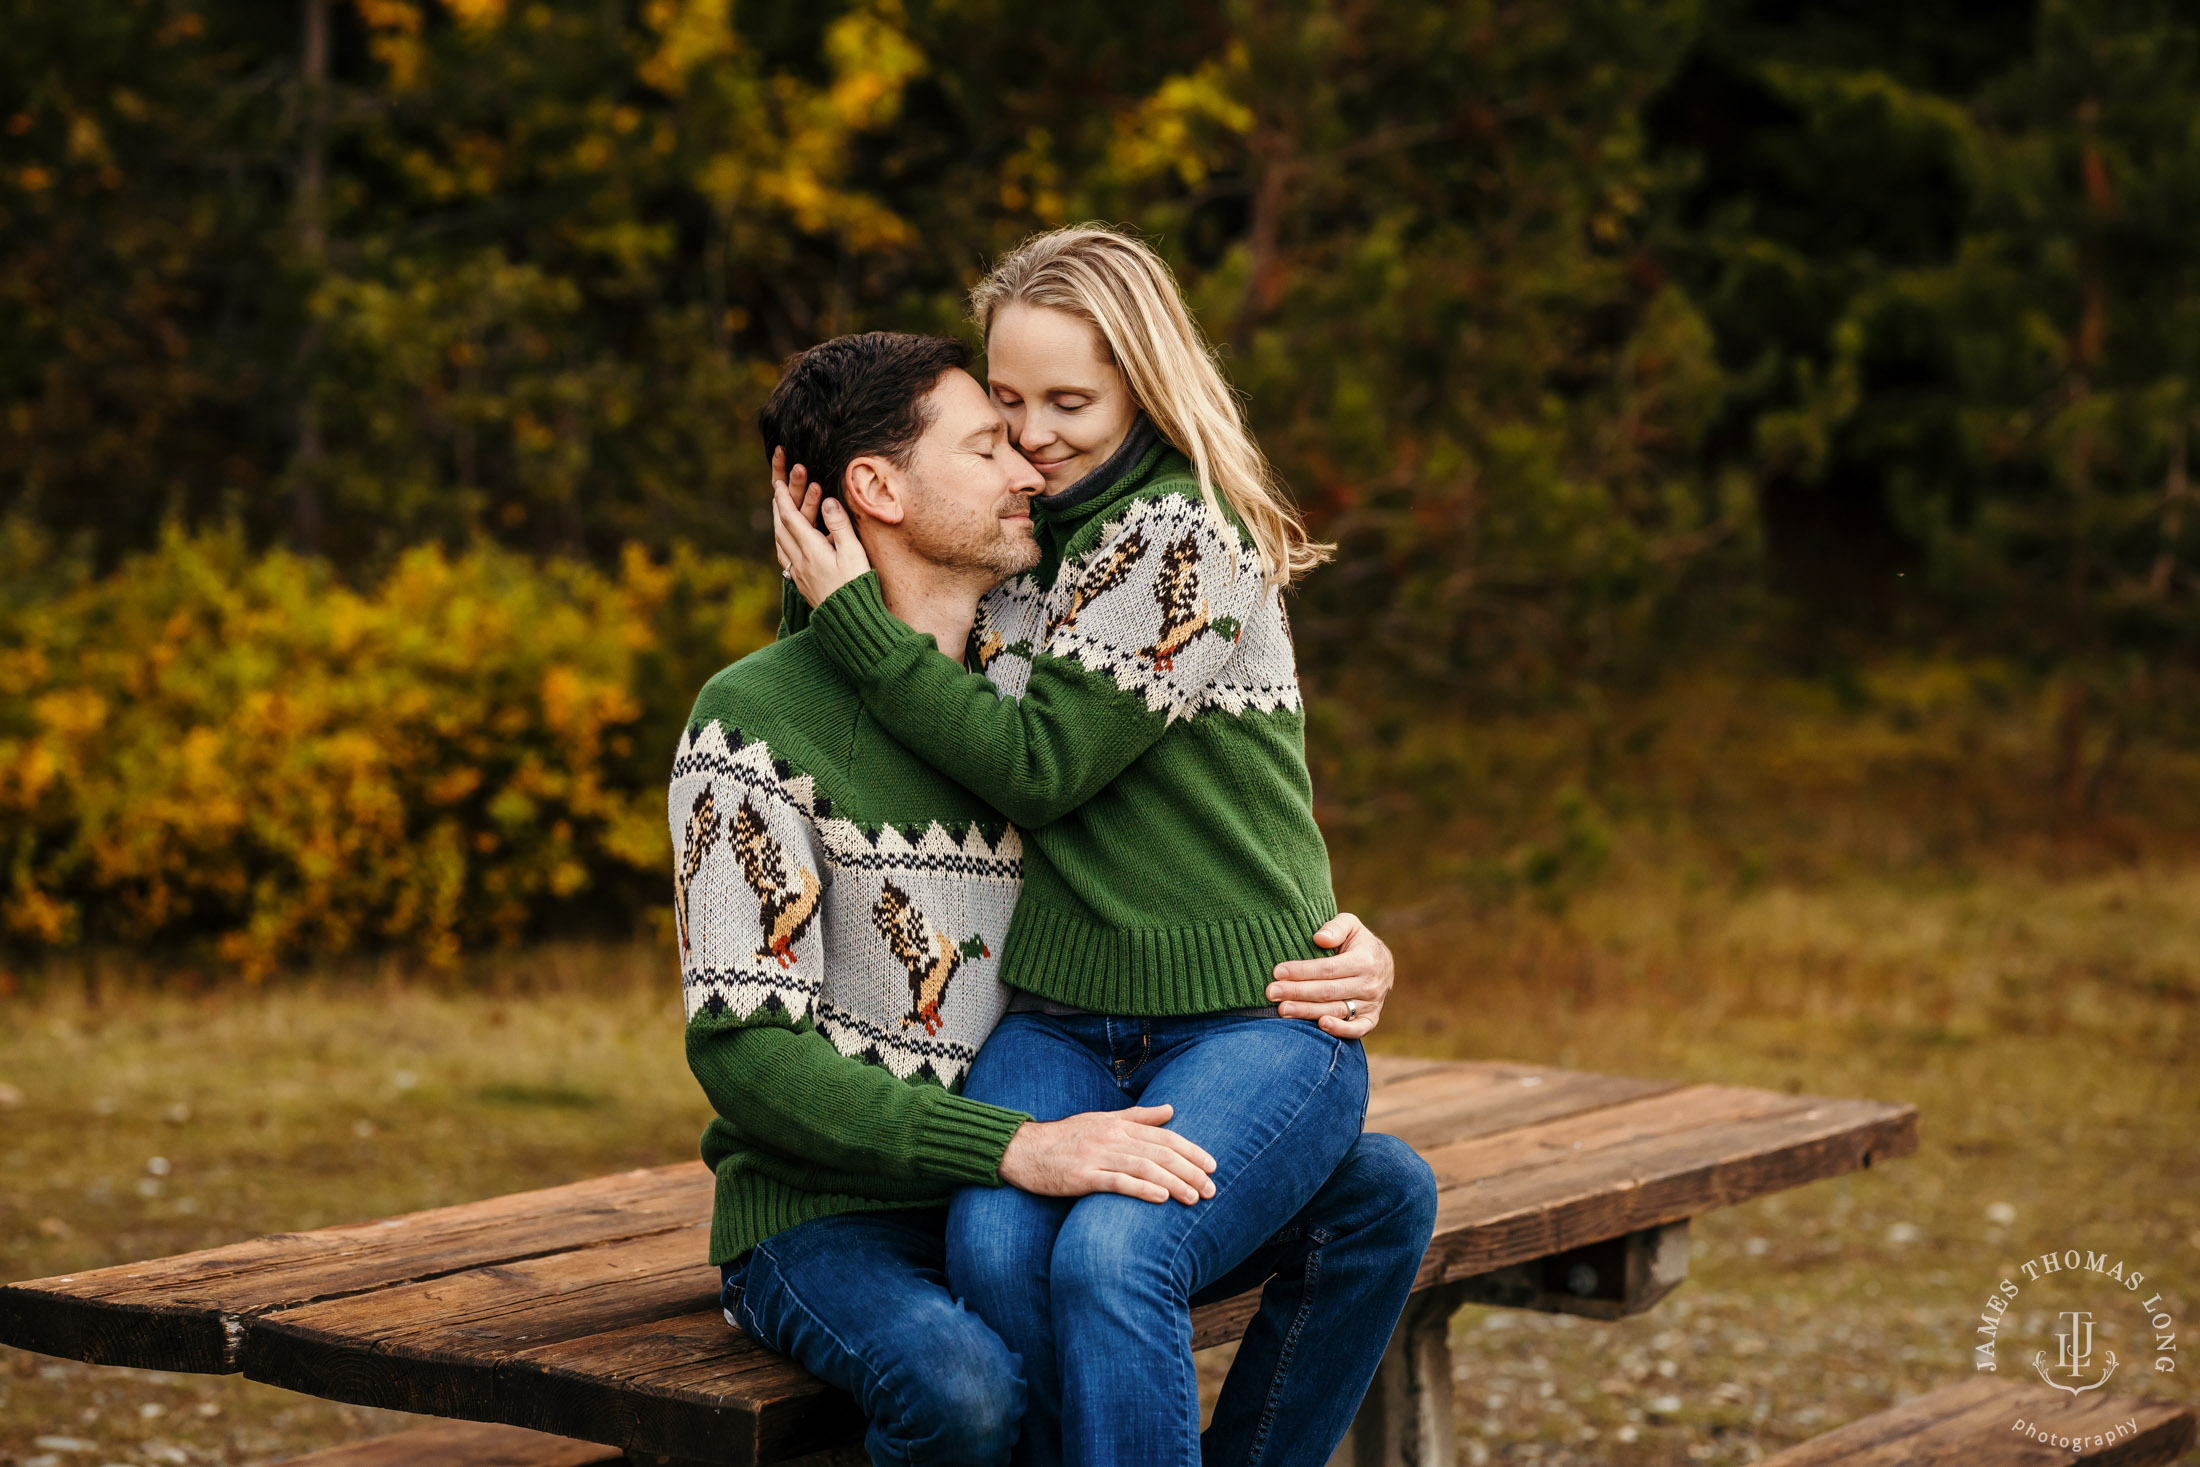 Snoqualmie Pass family photography session by Snoqualmie family photographer James Thomas Long Photography